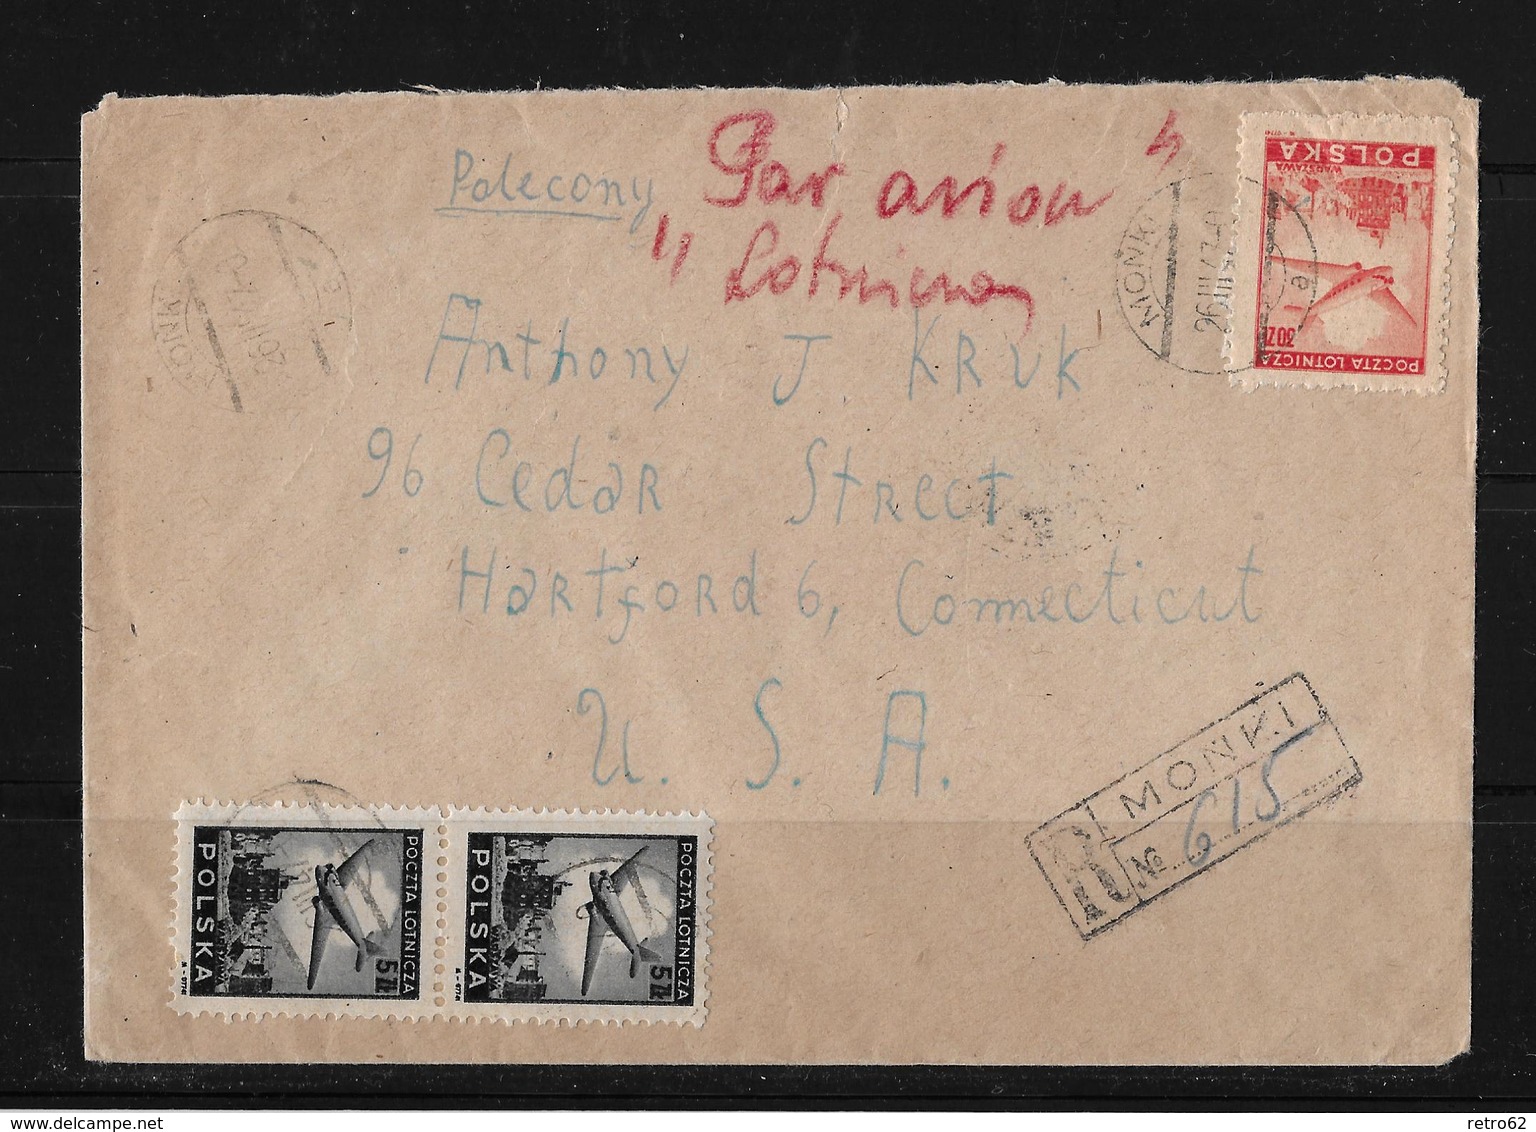 1947 Poland → Postage Paid 40 Zt On Registered Airmail Minki Letter Cover To US - Vliegtuigen